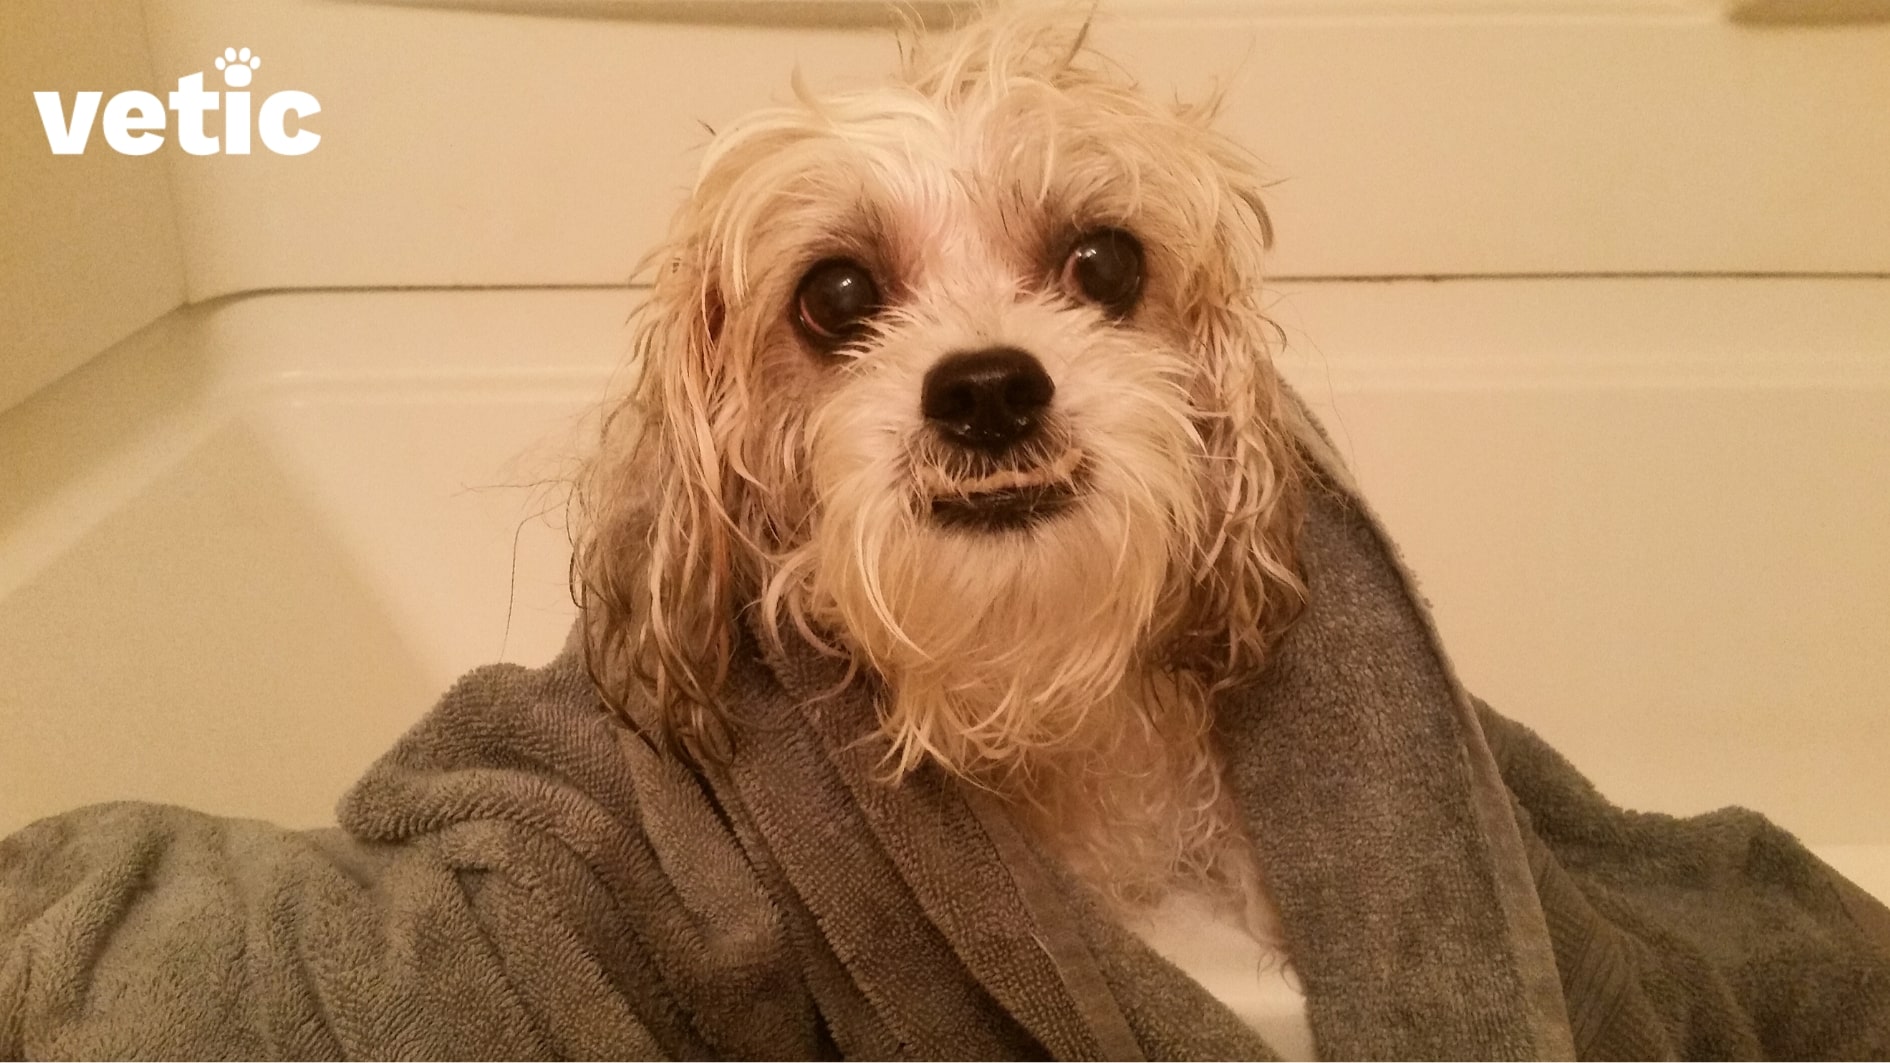 A Shih Tzu puppy with a severe underbite sitting wrapped in an olive green towel after bathing. Regular brushing and bathing with the right products can protect all breeds of dogs from skin allergies.